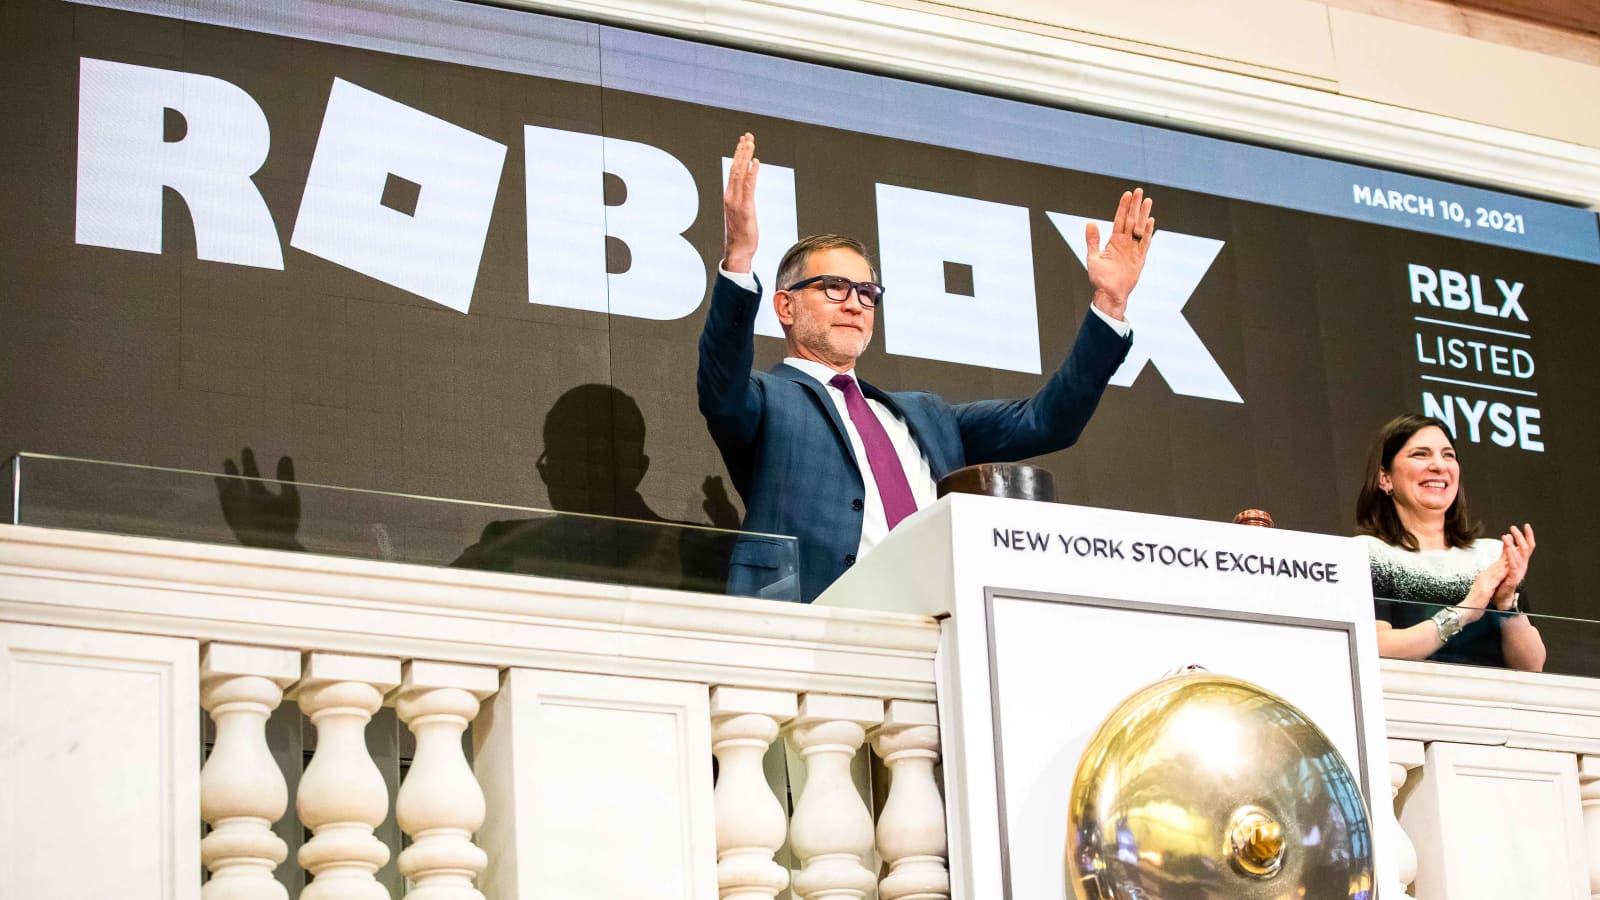 Roblox Switches to Direct Listing From IPO With Investment - Bloomberg